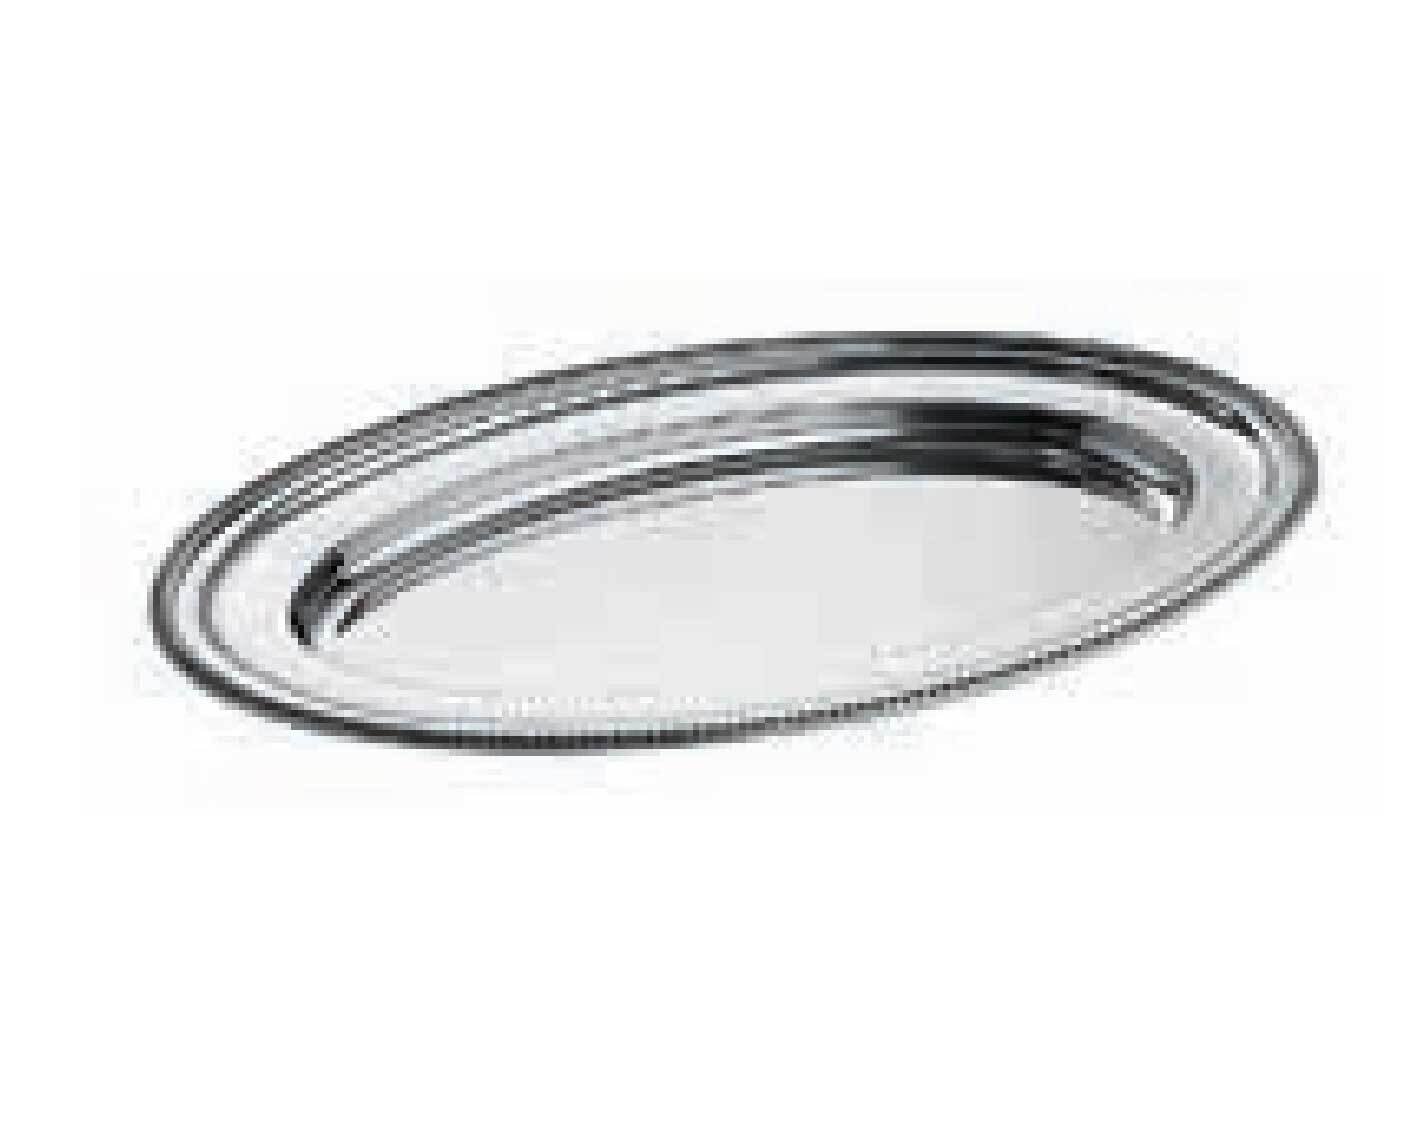 Ercuis Fleurs Oval Tray 19.25 x 14.625 Inch Silver Plated F51F455-49